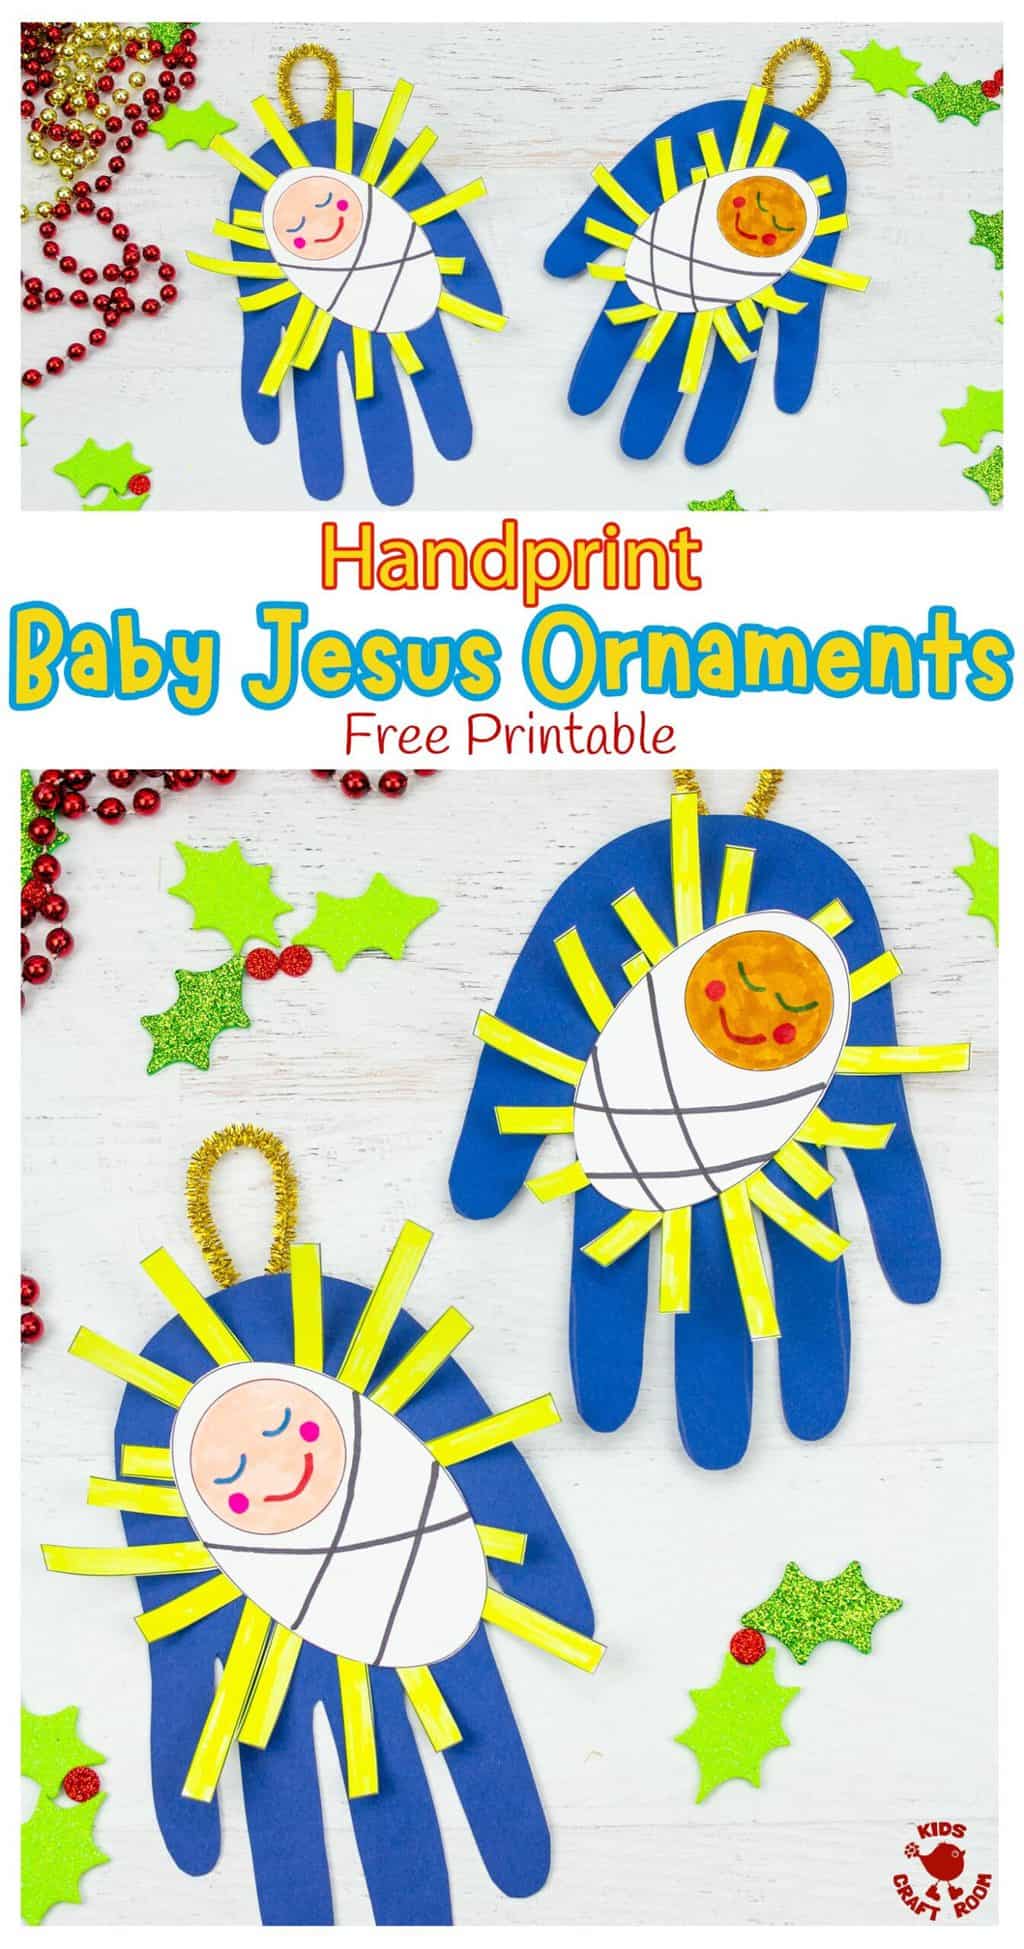 4 Handprint Baby Jesus Ornament Crafts lying on white table top surrounded by glittered holly leaves and red and gold Christmas bead garlands. 